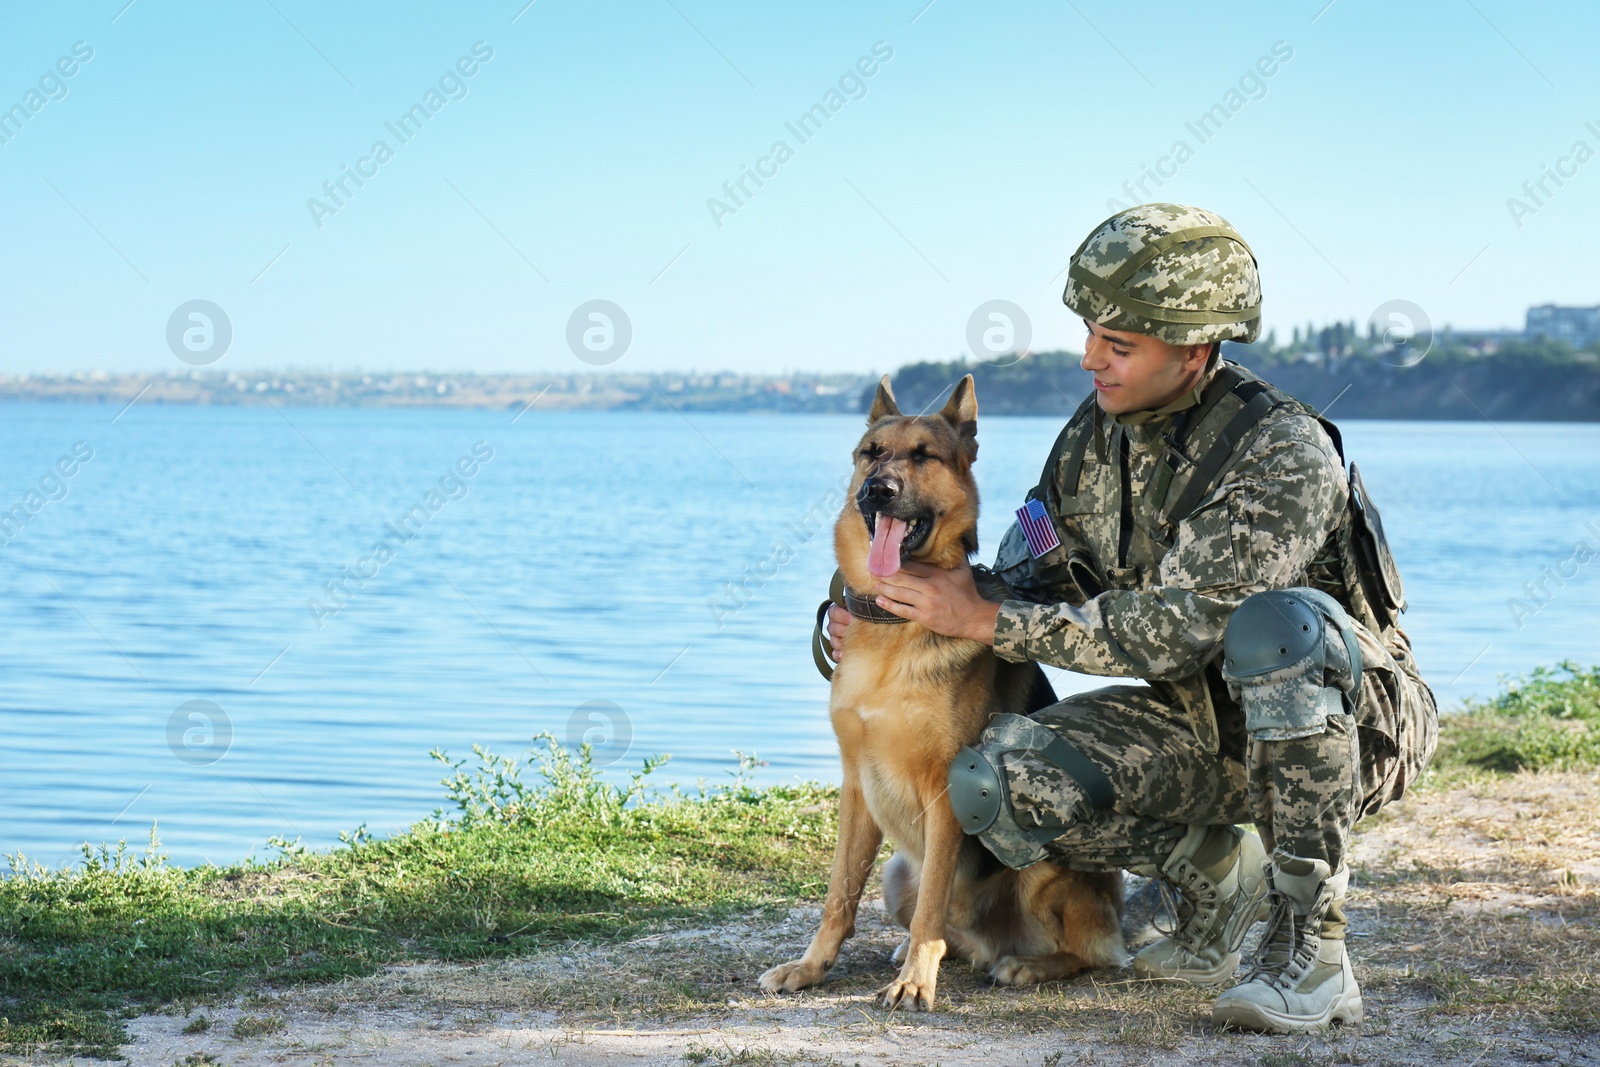 Photo of Man in military uniform with German shepherd dog near river, space for text